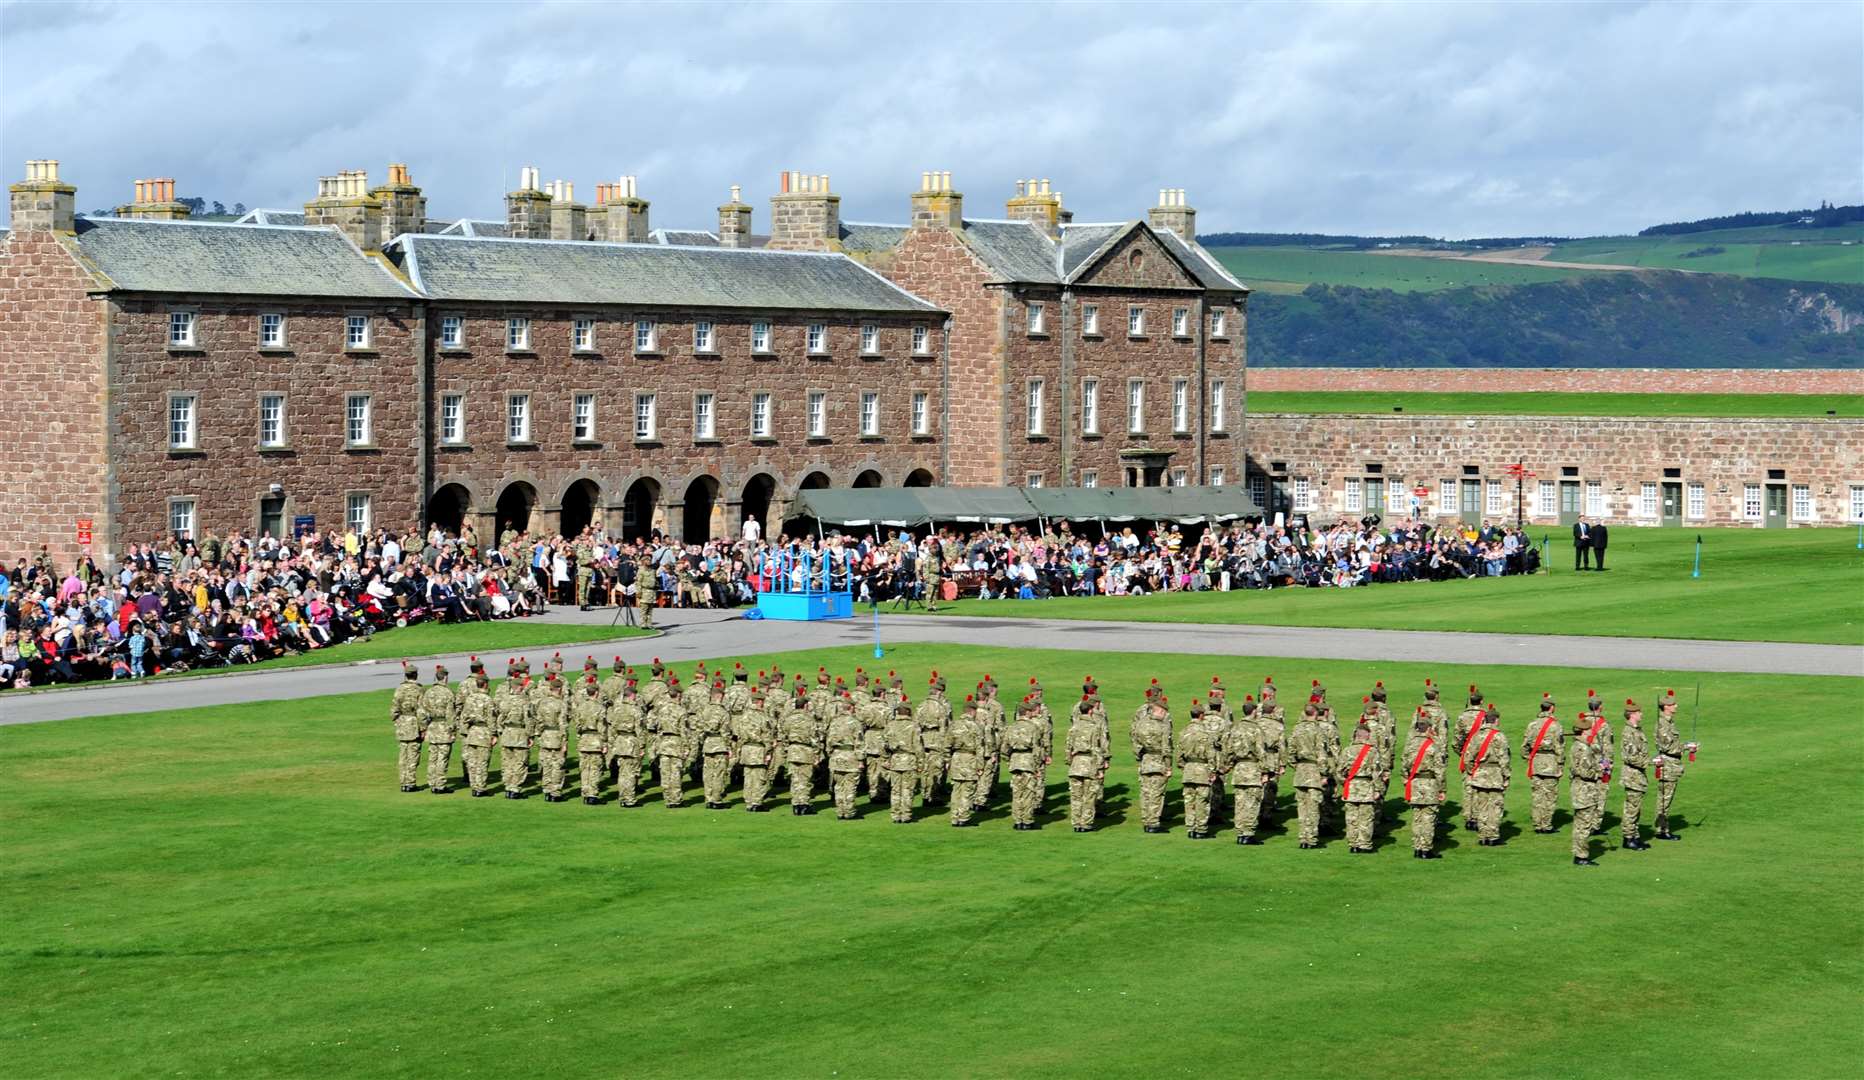 About 500 personnel are based at Fort George.